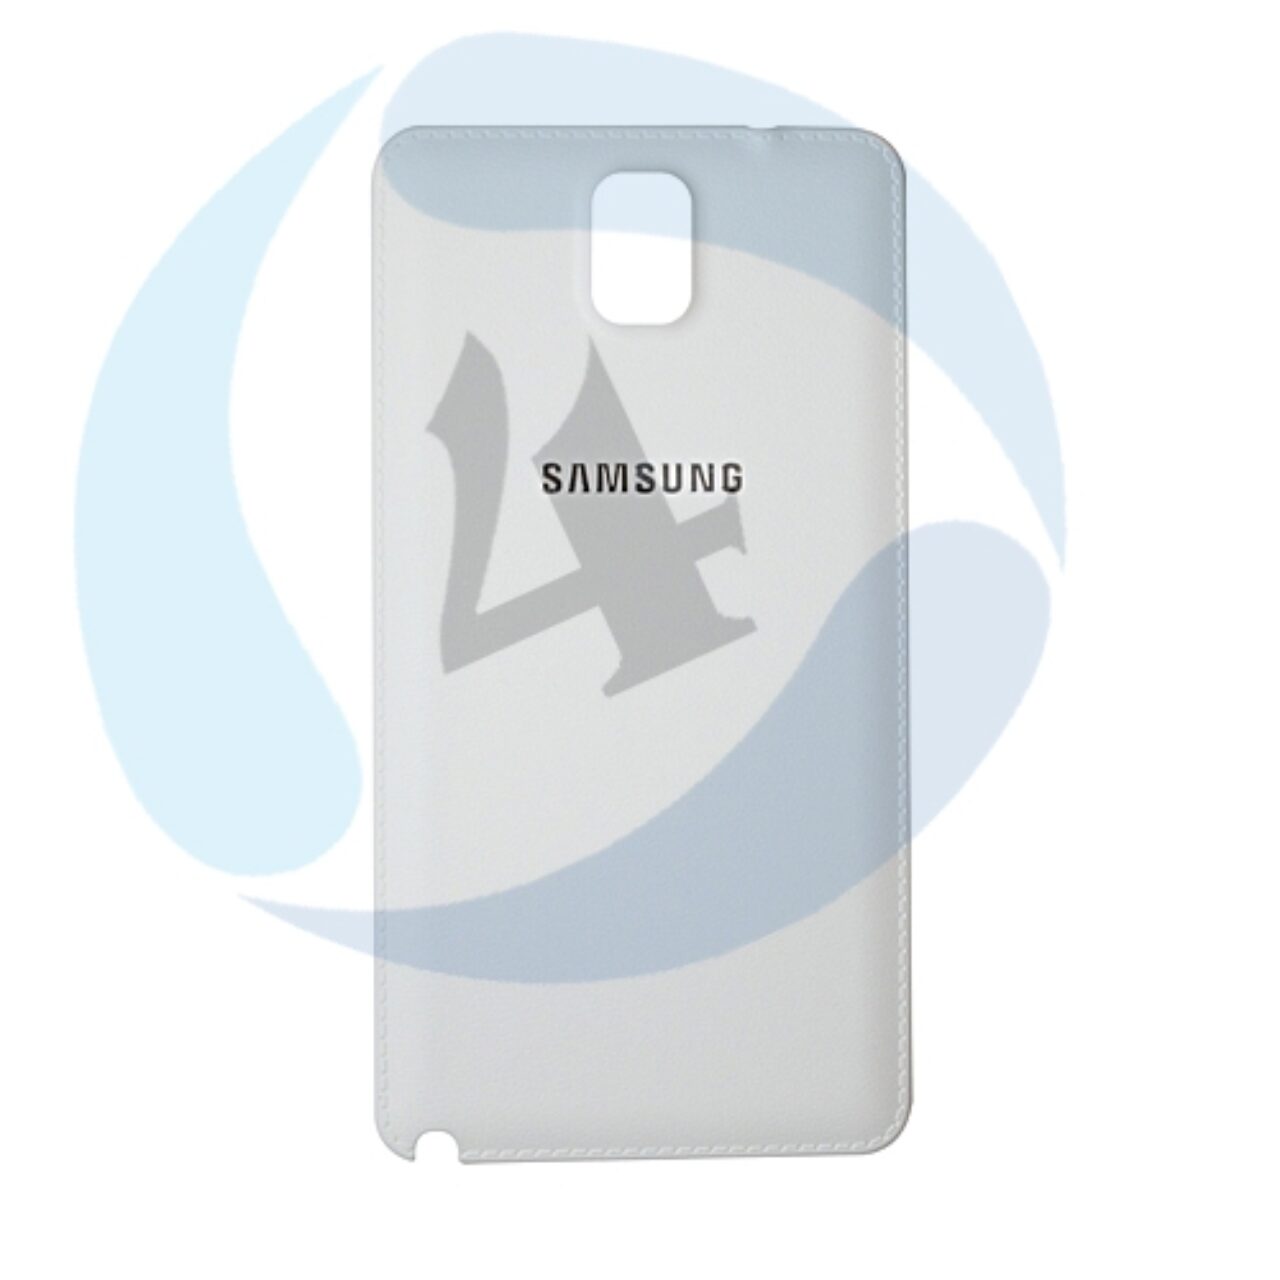 SAMSUNG Note 3 backcover wit